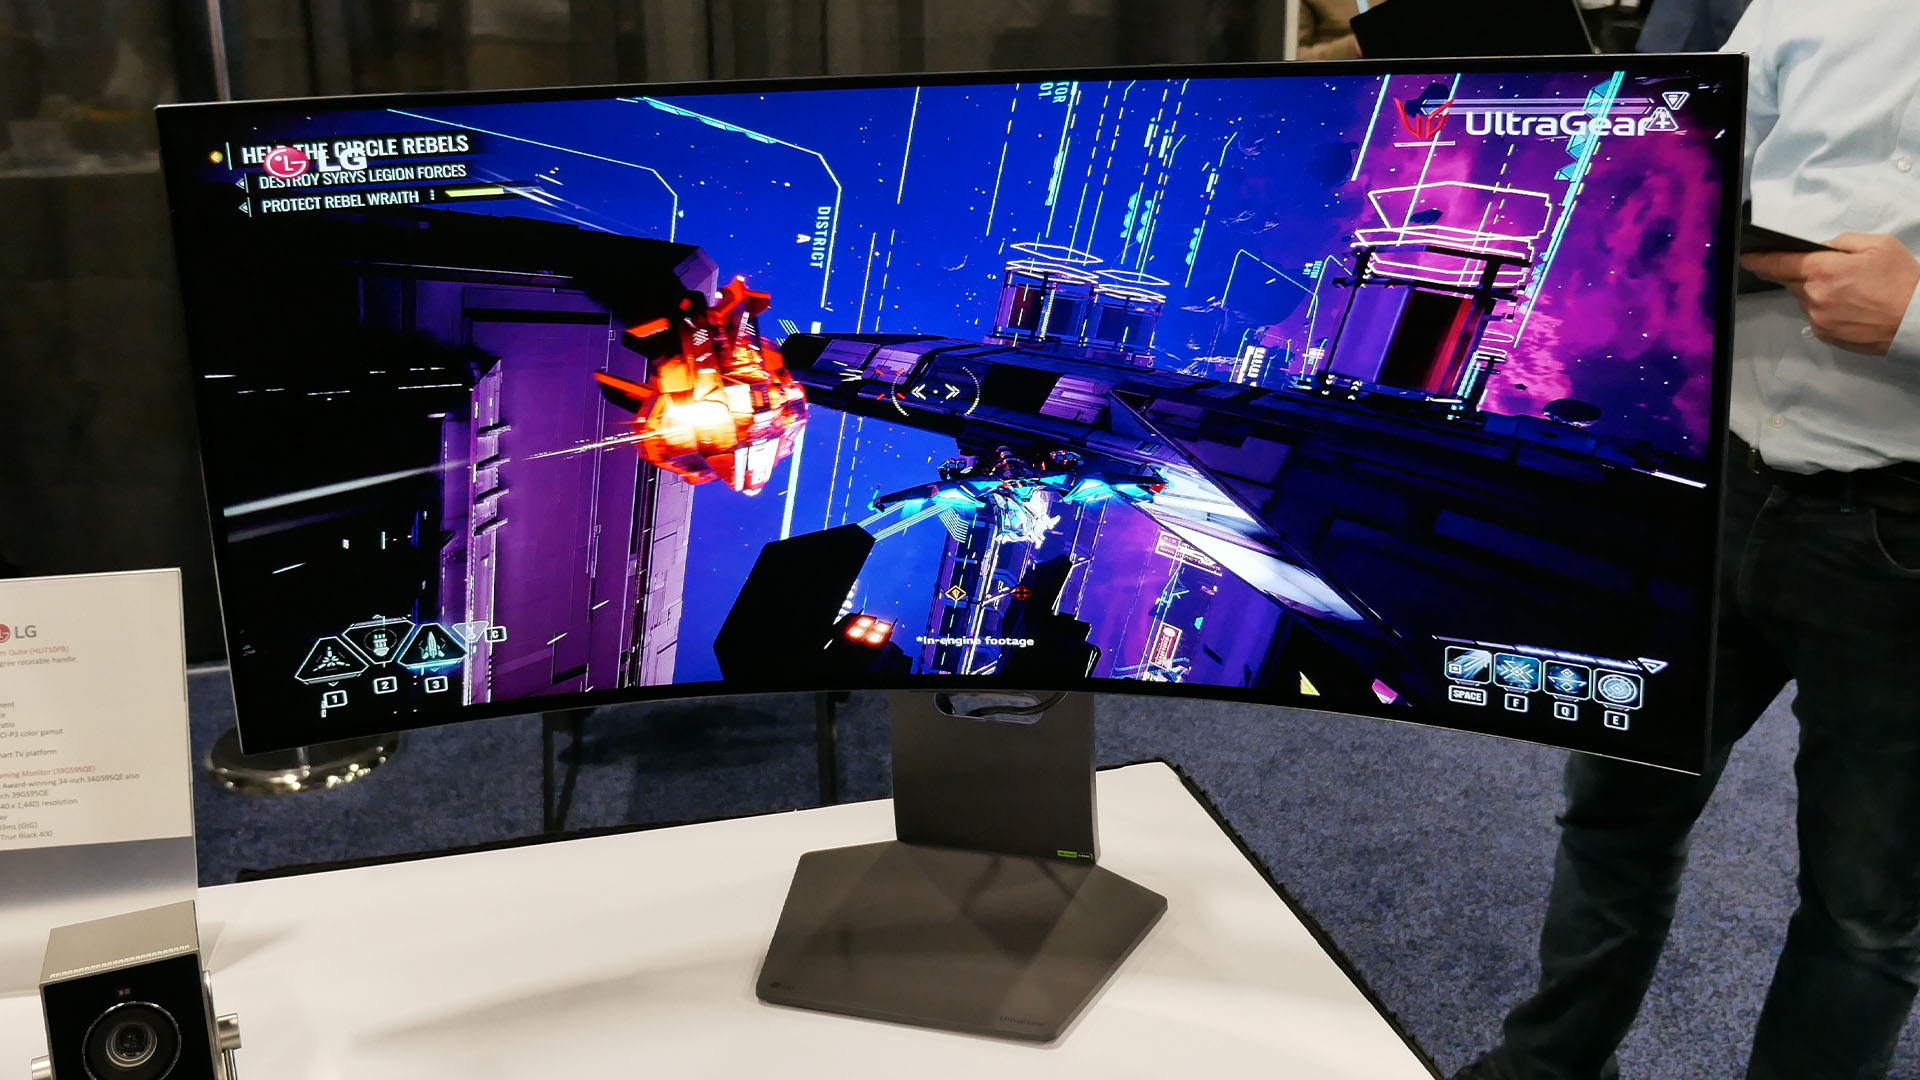 LG's new OLED gaming monitor is its bendiest and most brilliant yet